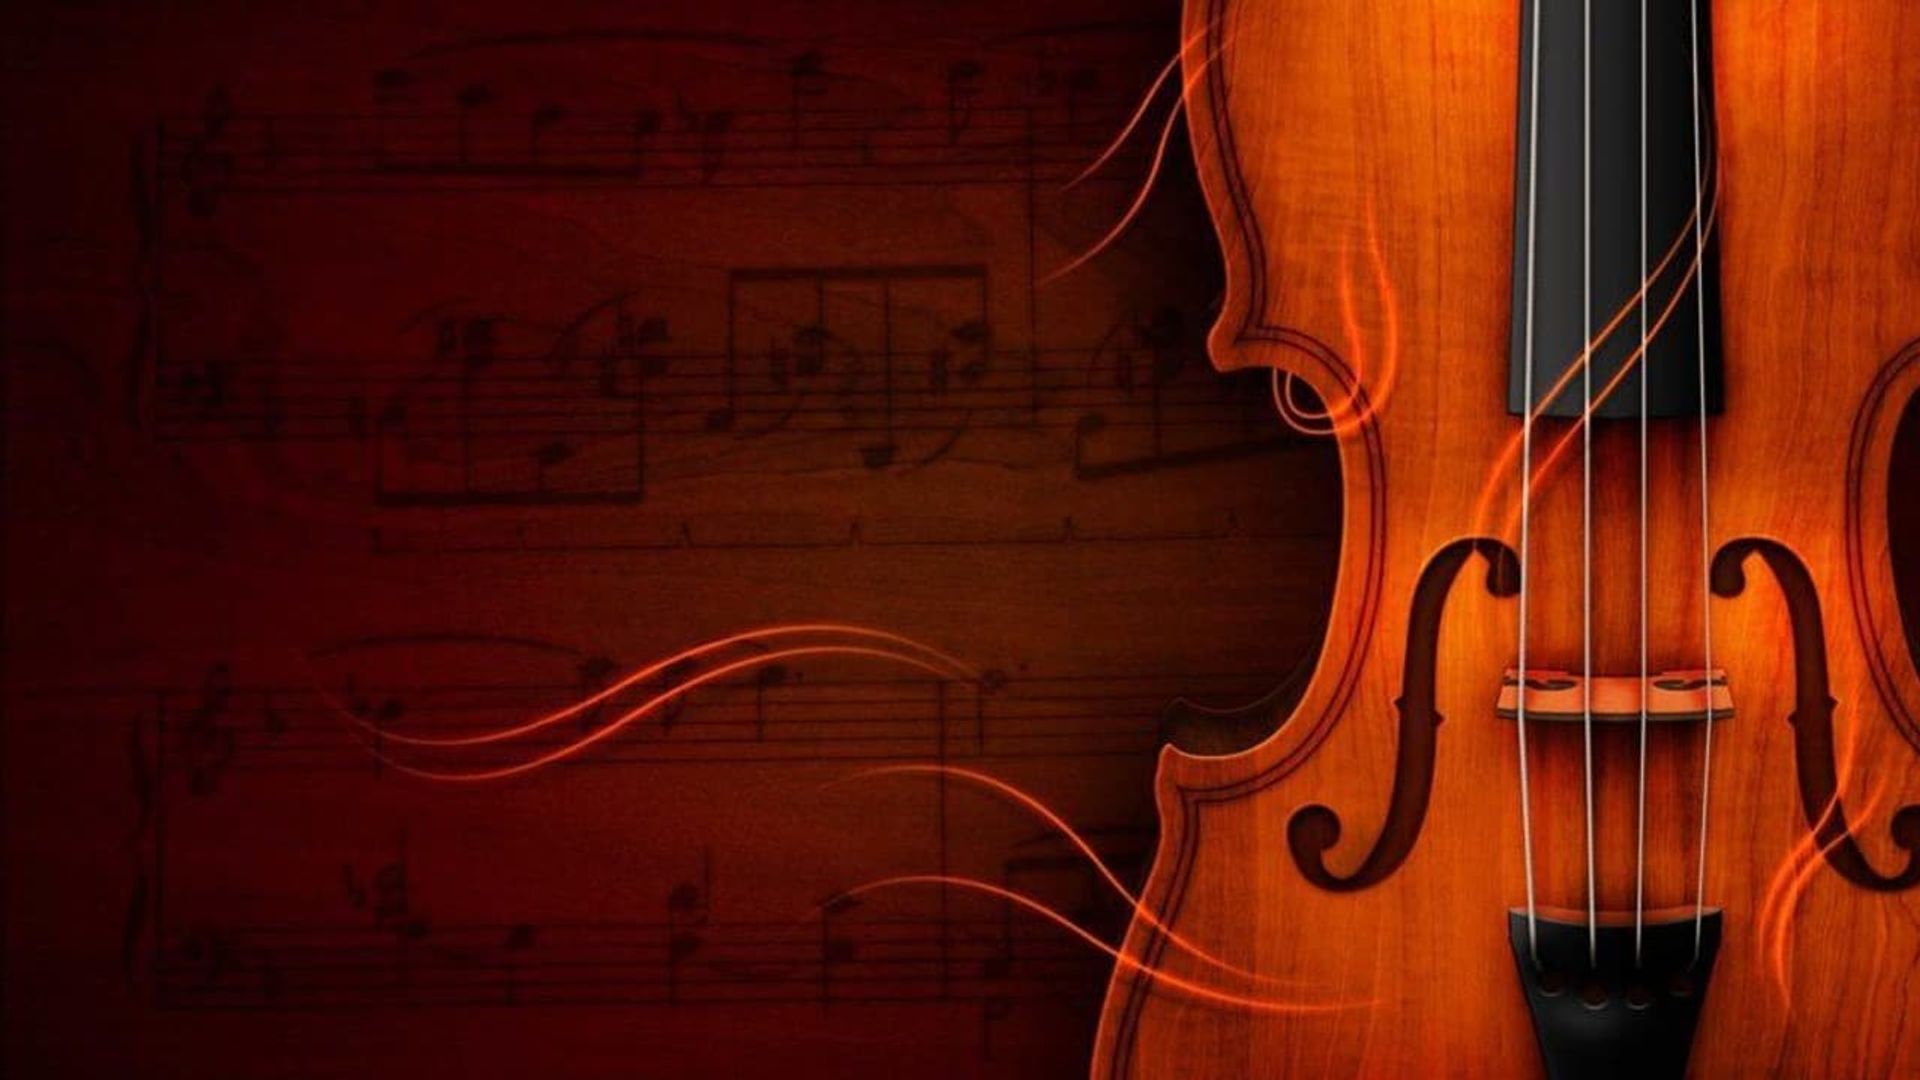 The Red Violin background